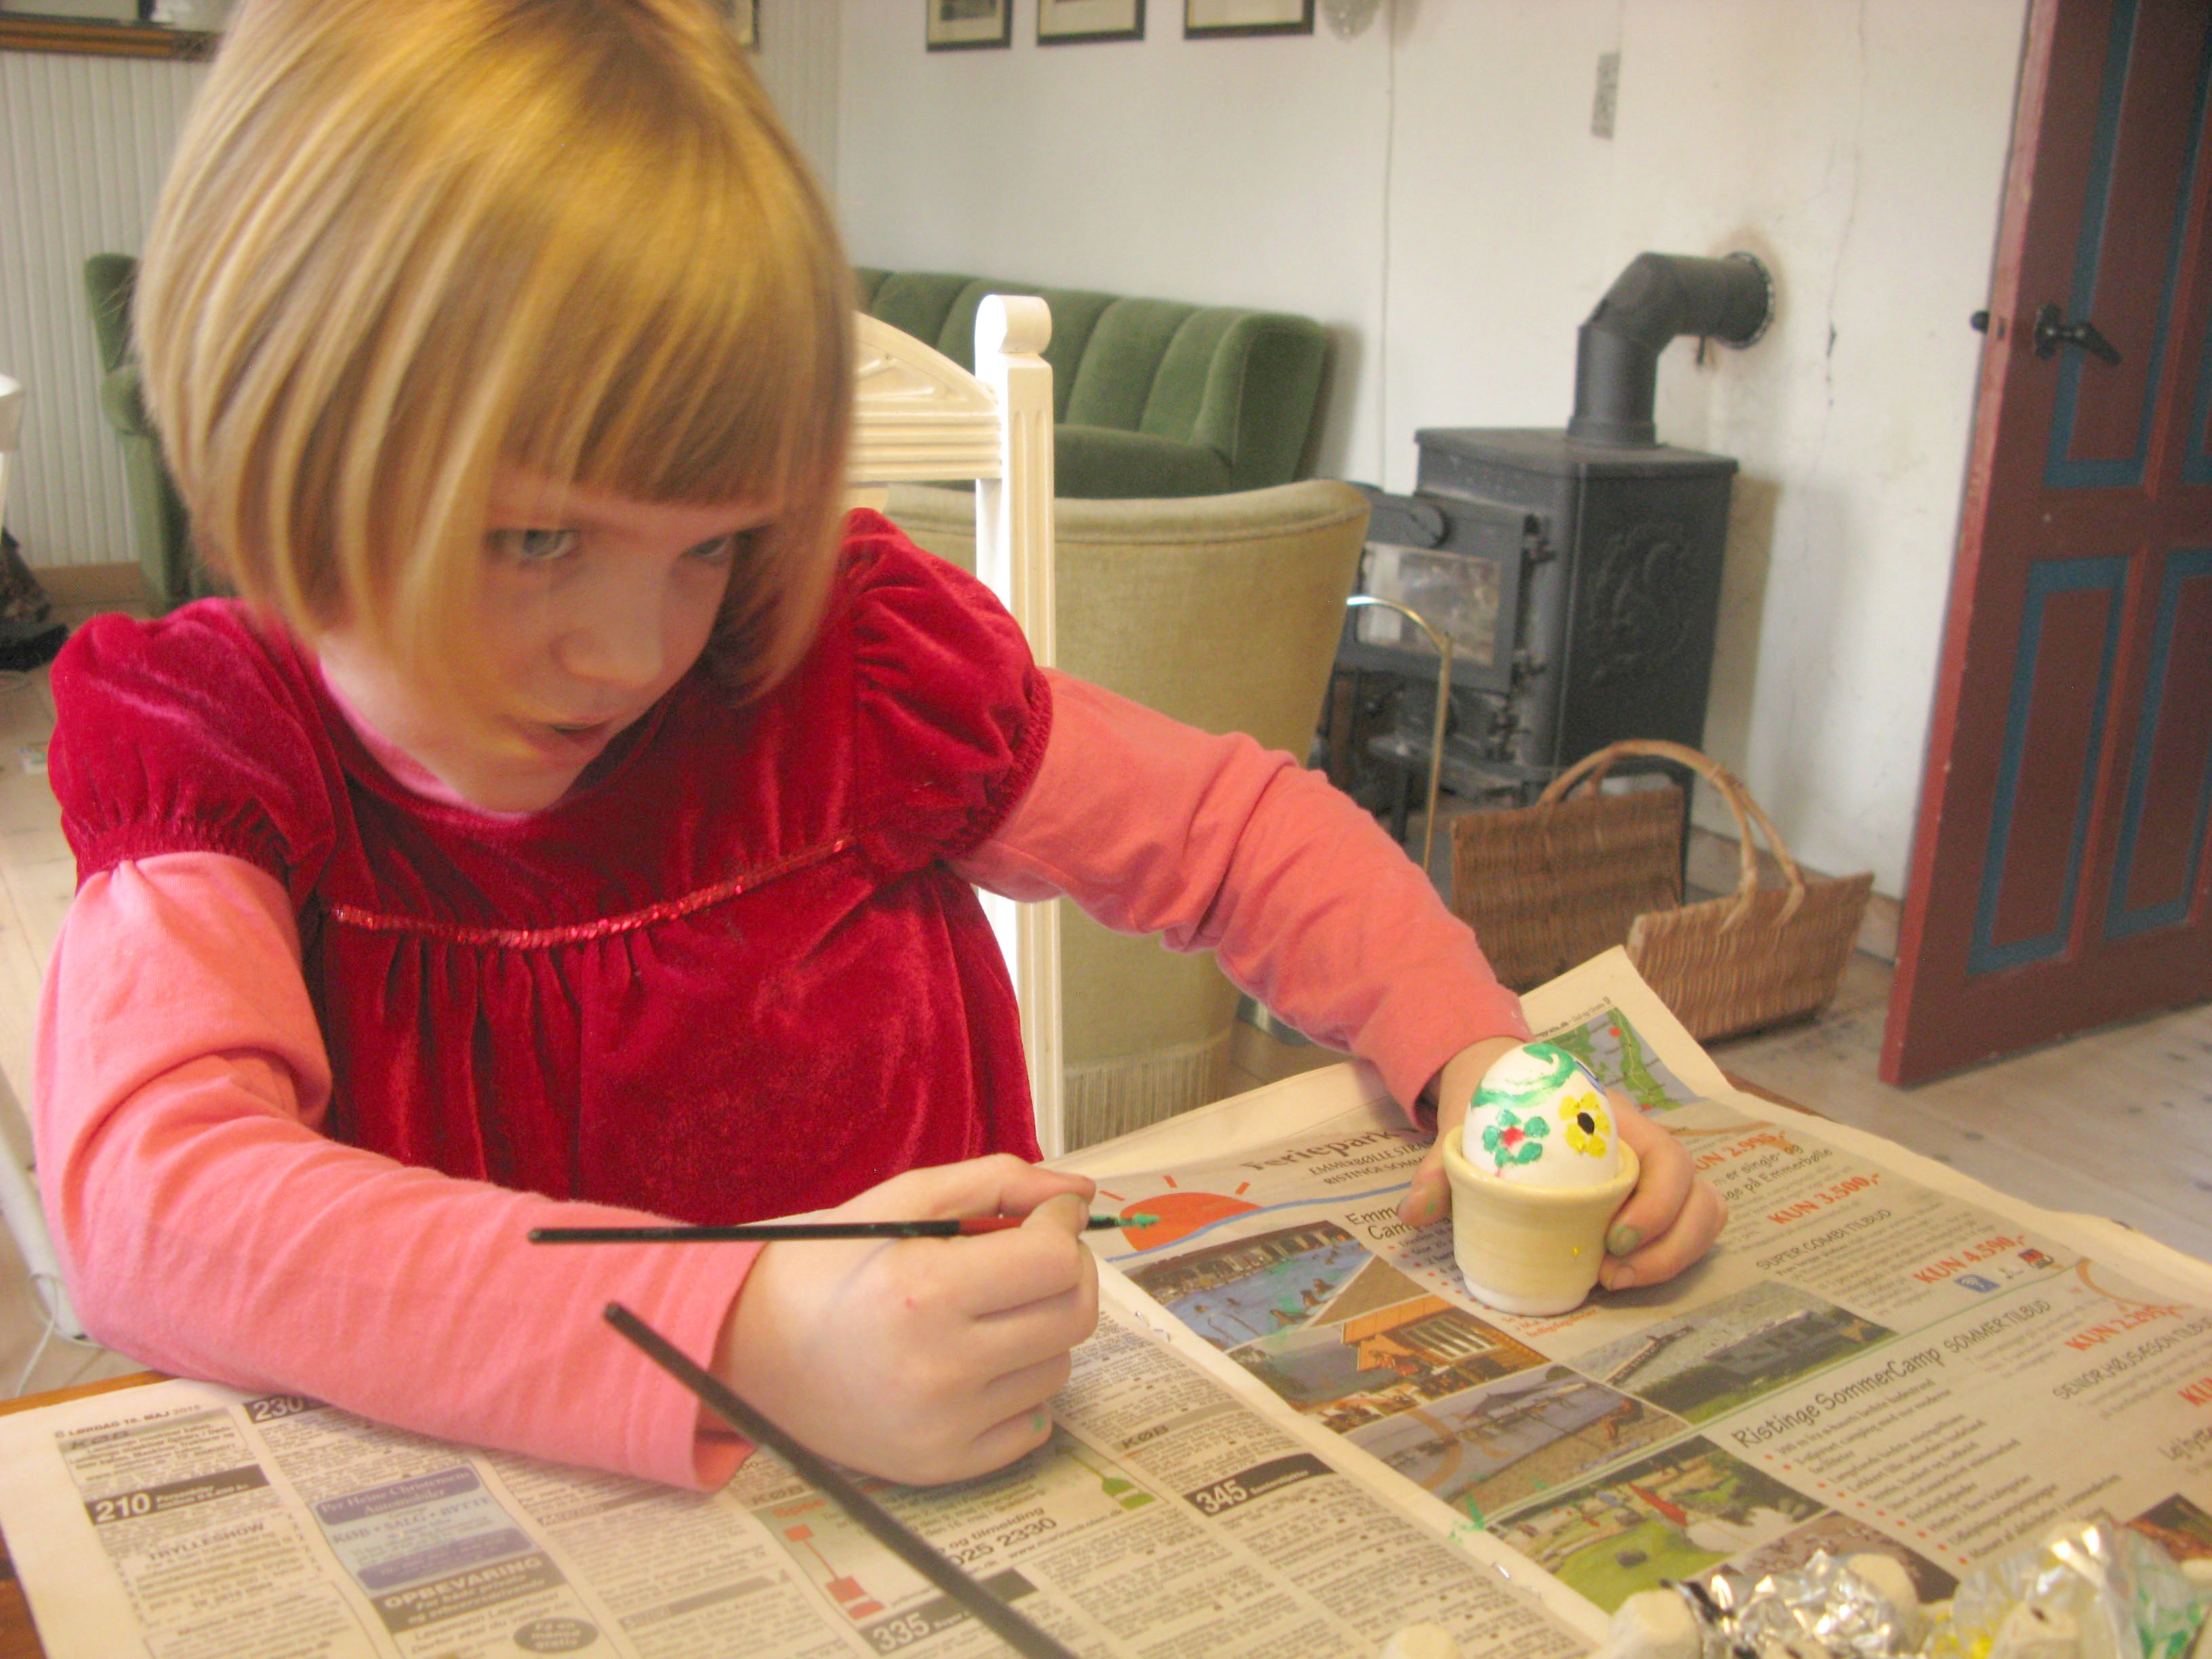 Kids Corner: Pottering about in the capable hands of Creative Space